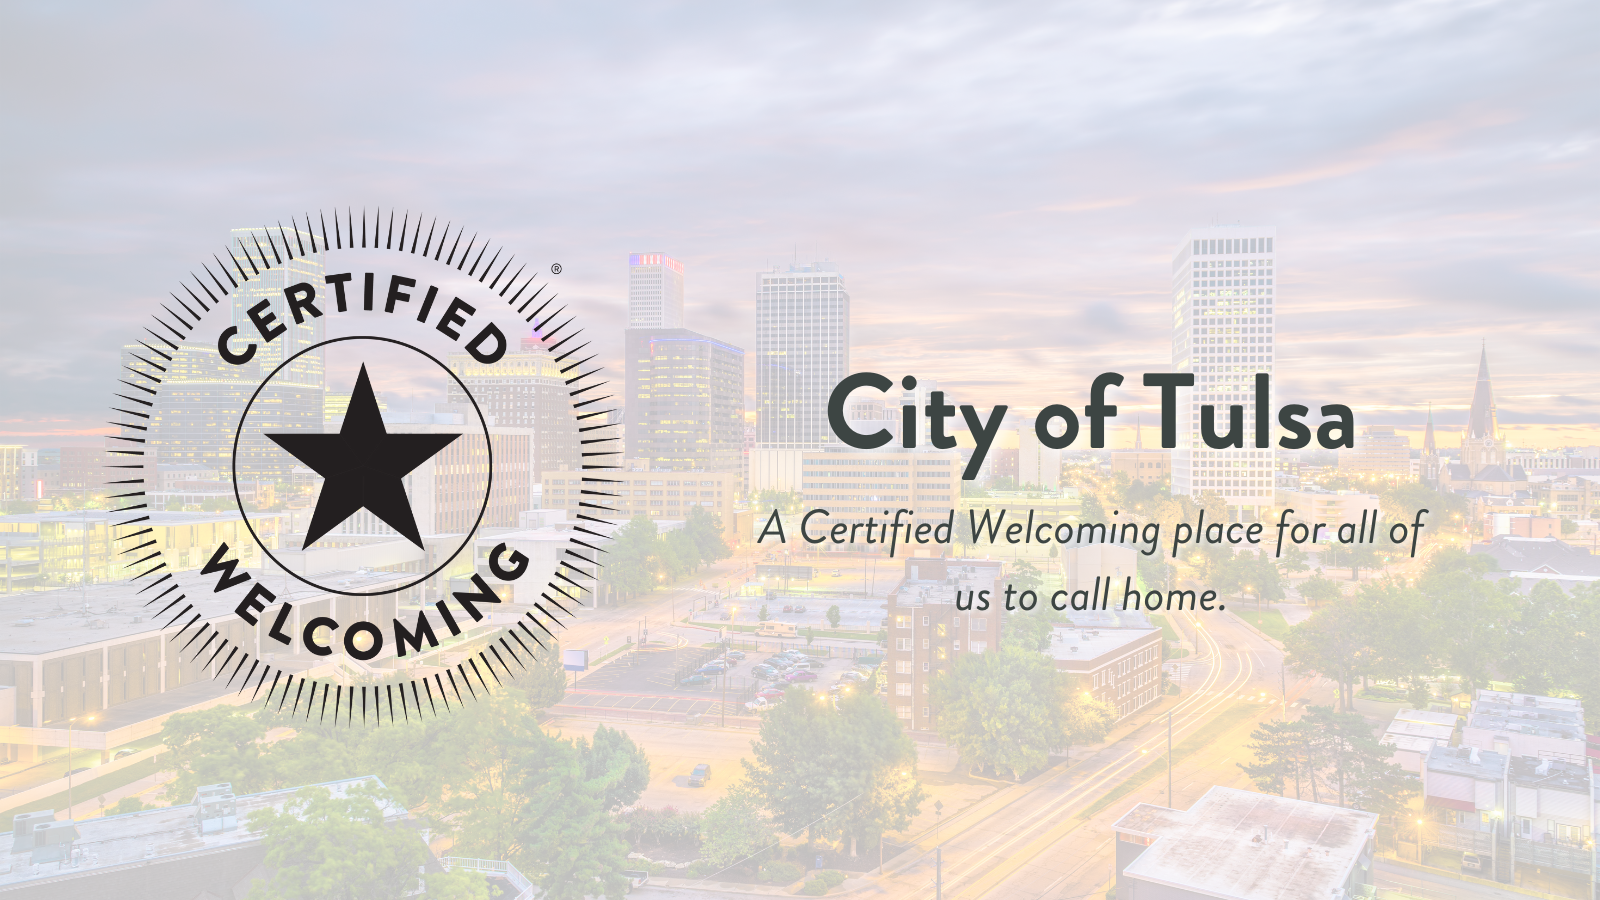 Aerial photo of Tulsa, Oklahoma with the Certified Welcoming Seal and text that reads "City of Tulsa: A Certified Welcoming place for all of us to call home"